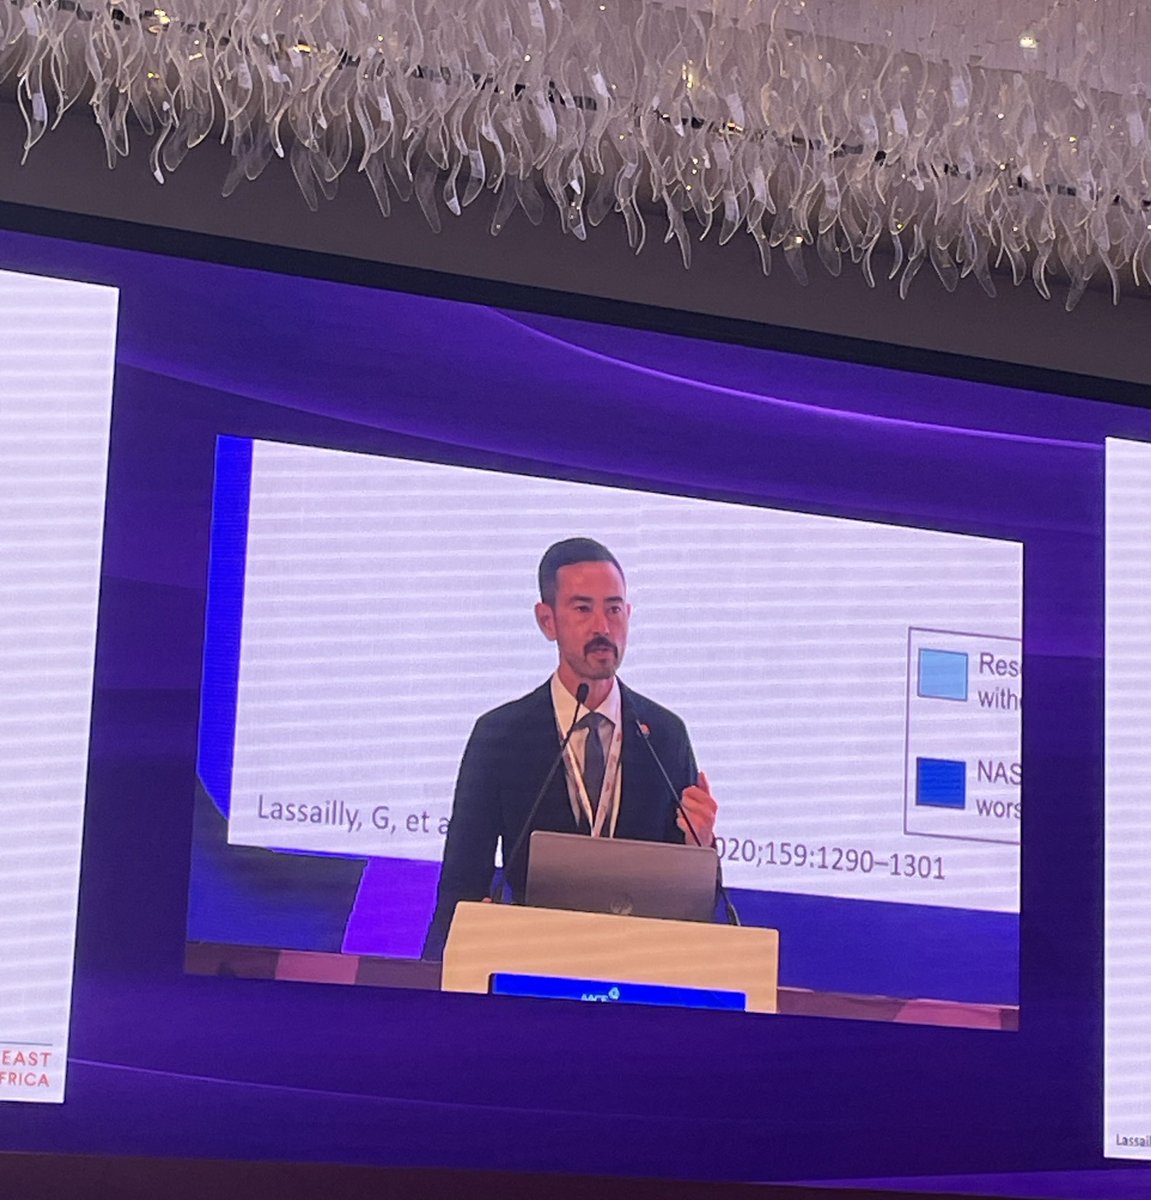 ✨The AACE Cardiometabolic Conference began with insightful talks, including our chair, Prof. Jaime Almandoz’s discussion on post-bariatric weight regain. Don’t miss out on the last day of AACE! Join us and maximize your experience at this remarkable event. 📚 AACE MENA